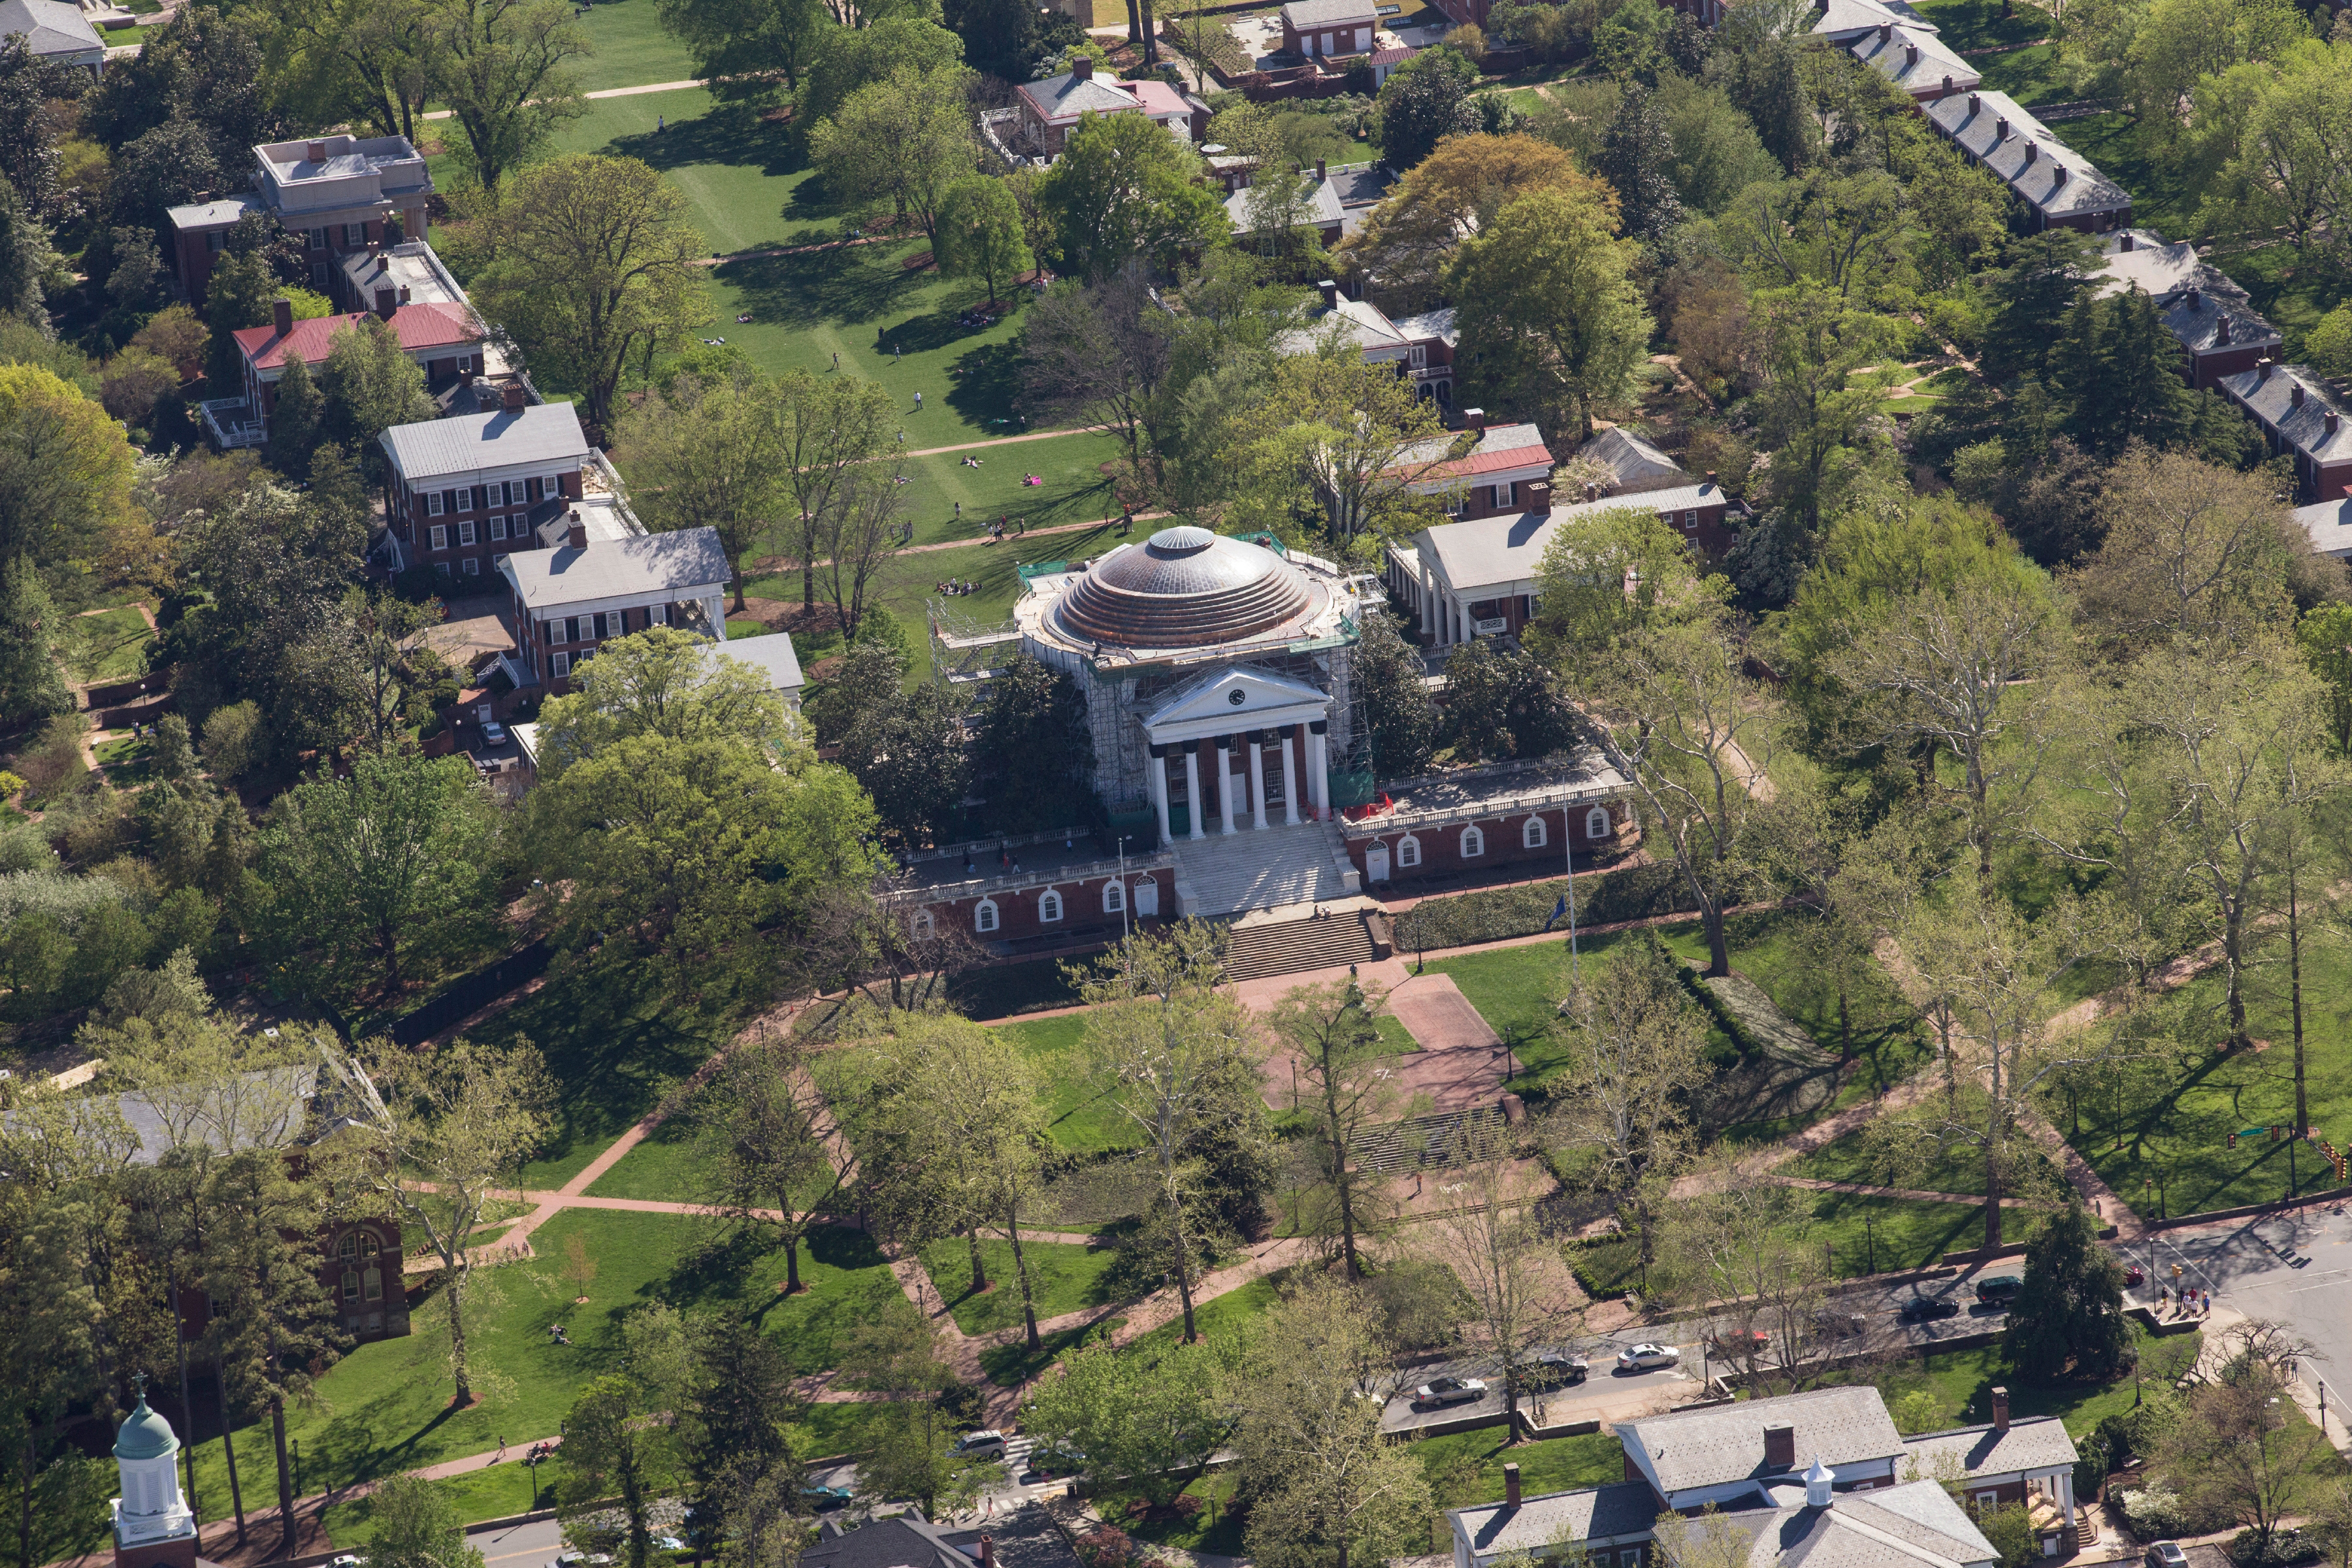 Aerial view of the Rotunda and the lawn